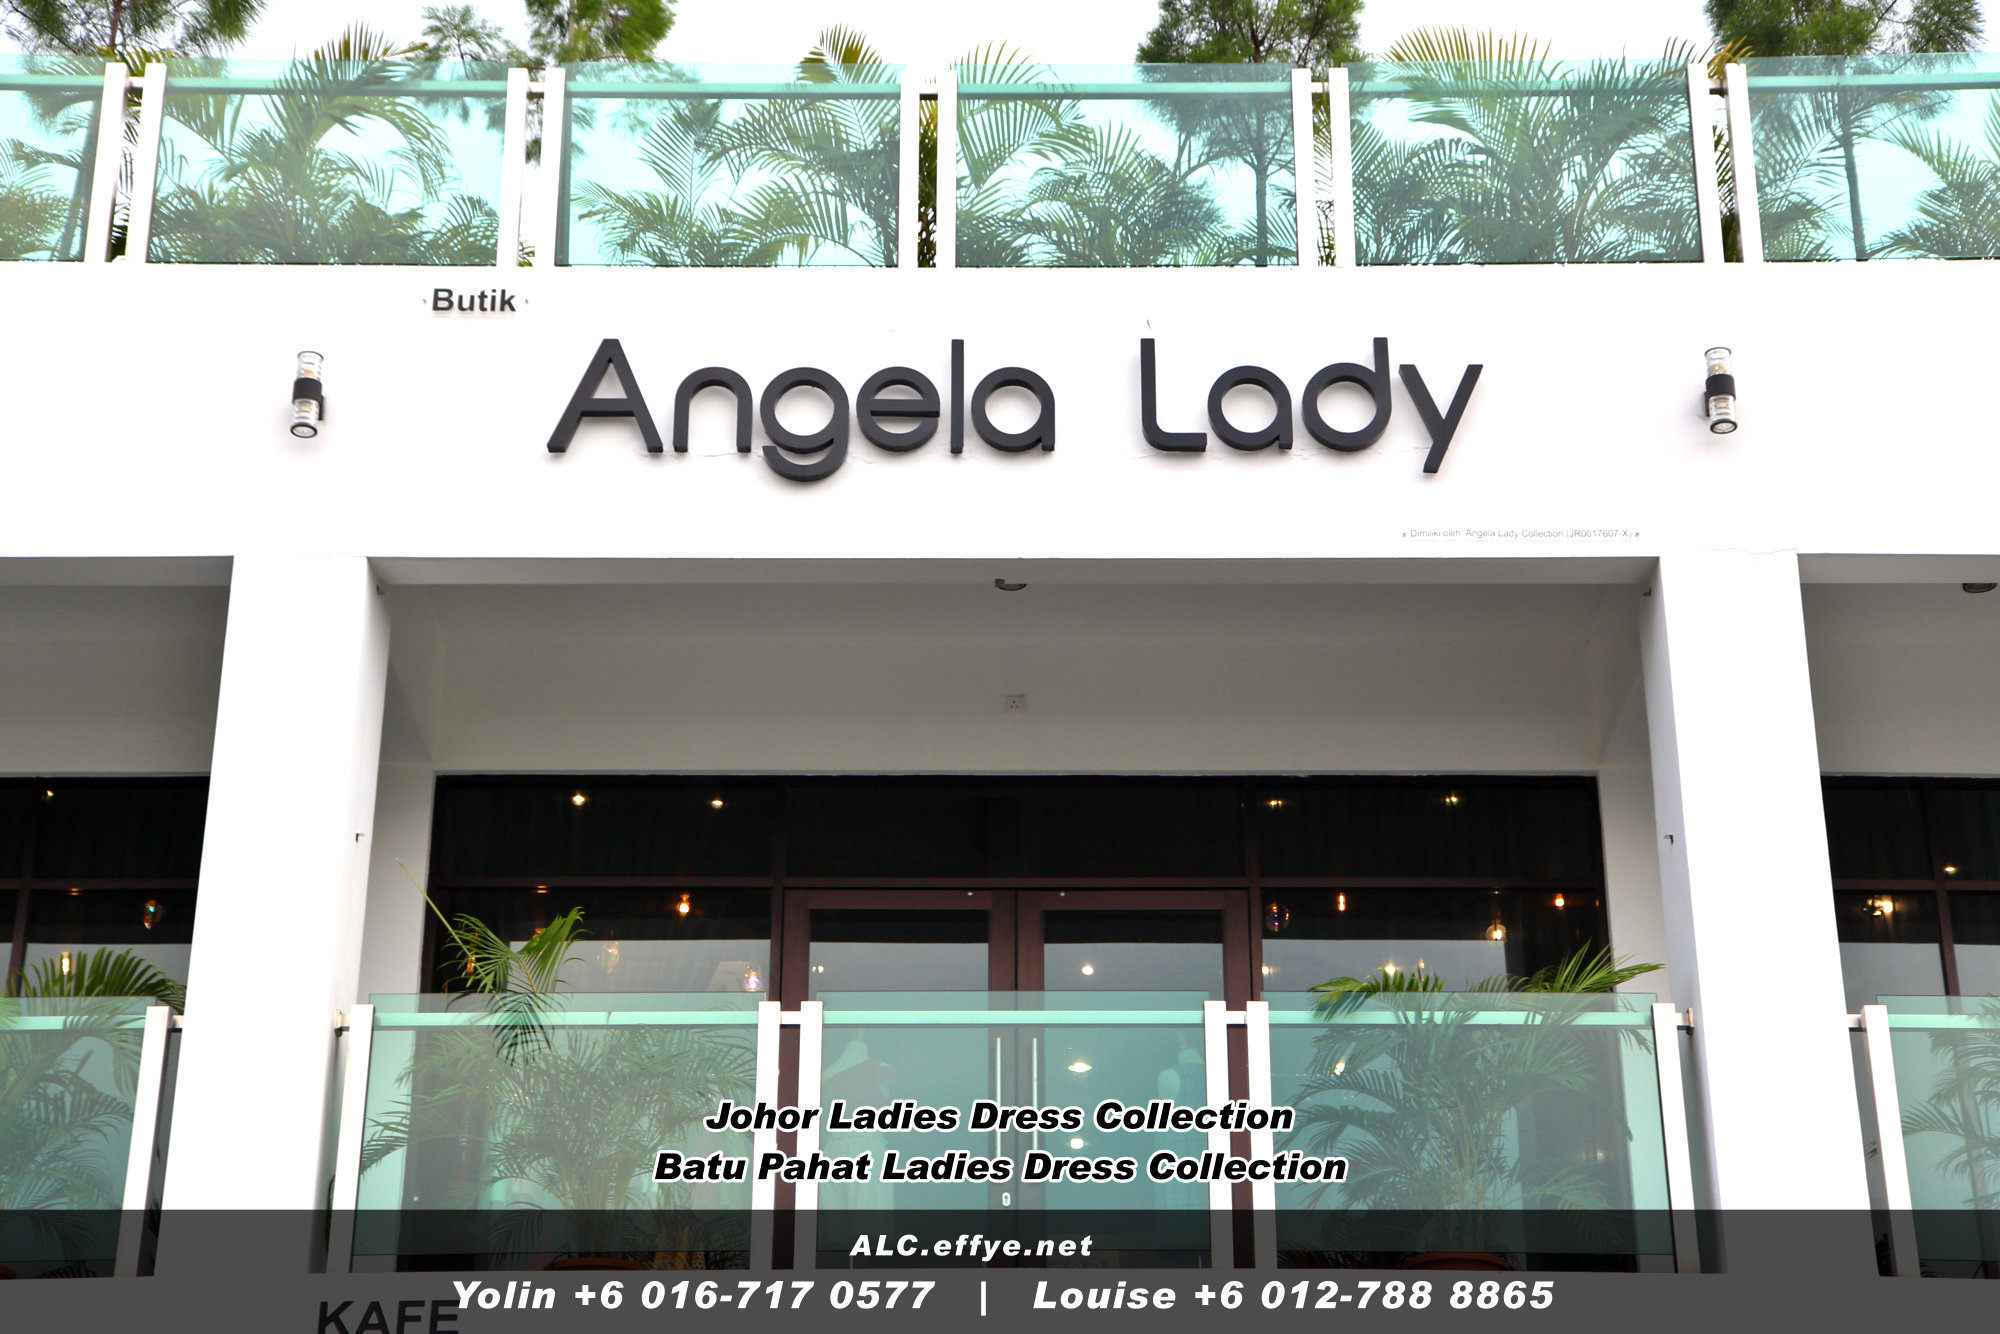 Johor Batu Pahat Ladies Dress Boutique Angela Lady Collection Dinner Dress Evening Gown Maxi Dress Evening Dress Gown Boutique Fashion Lady Apparel Clothes Jeans Skirt Pants Malaysia A03-008